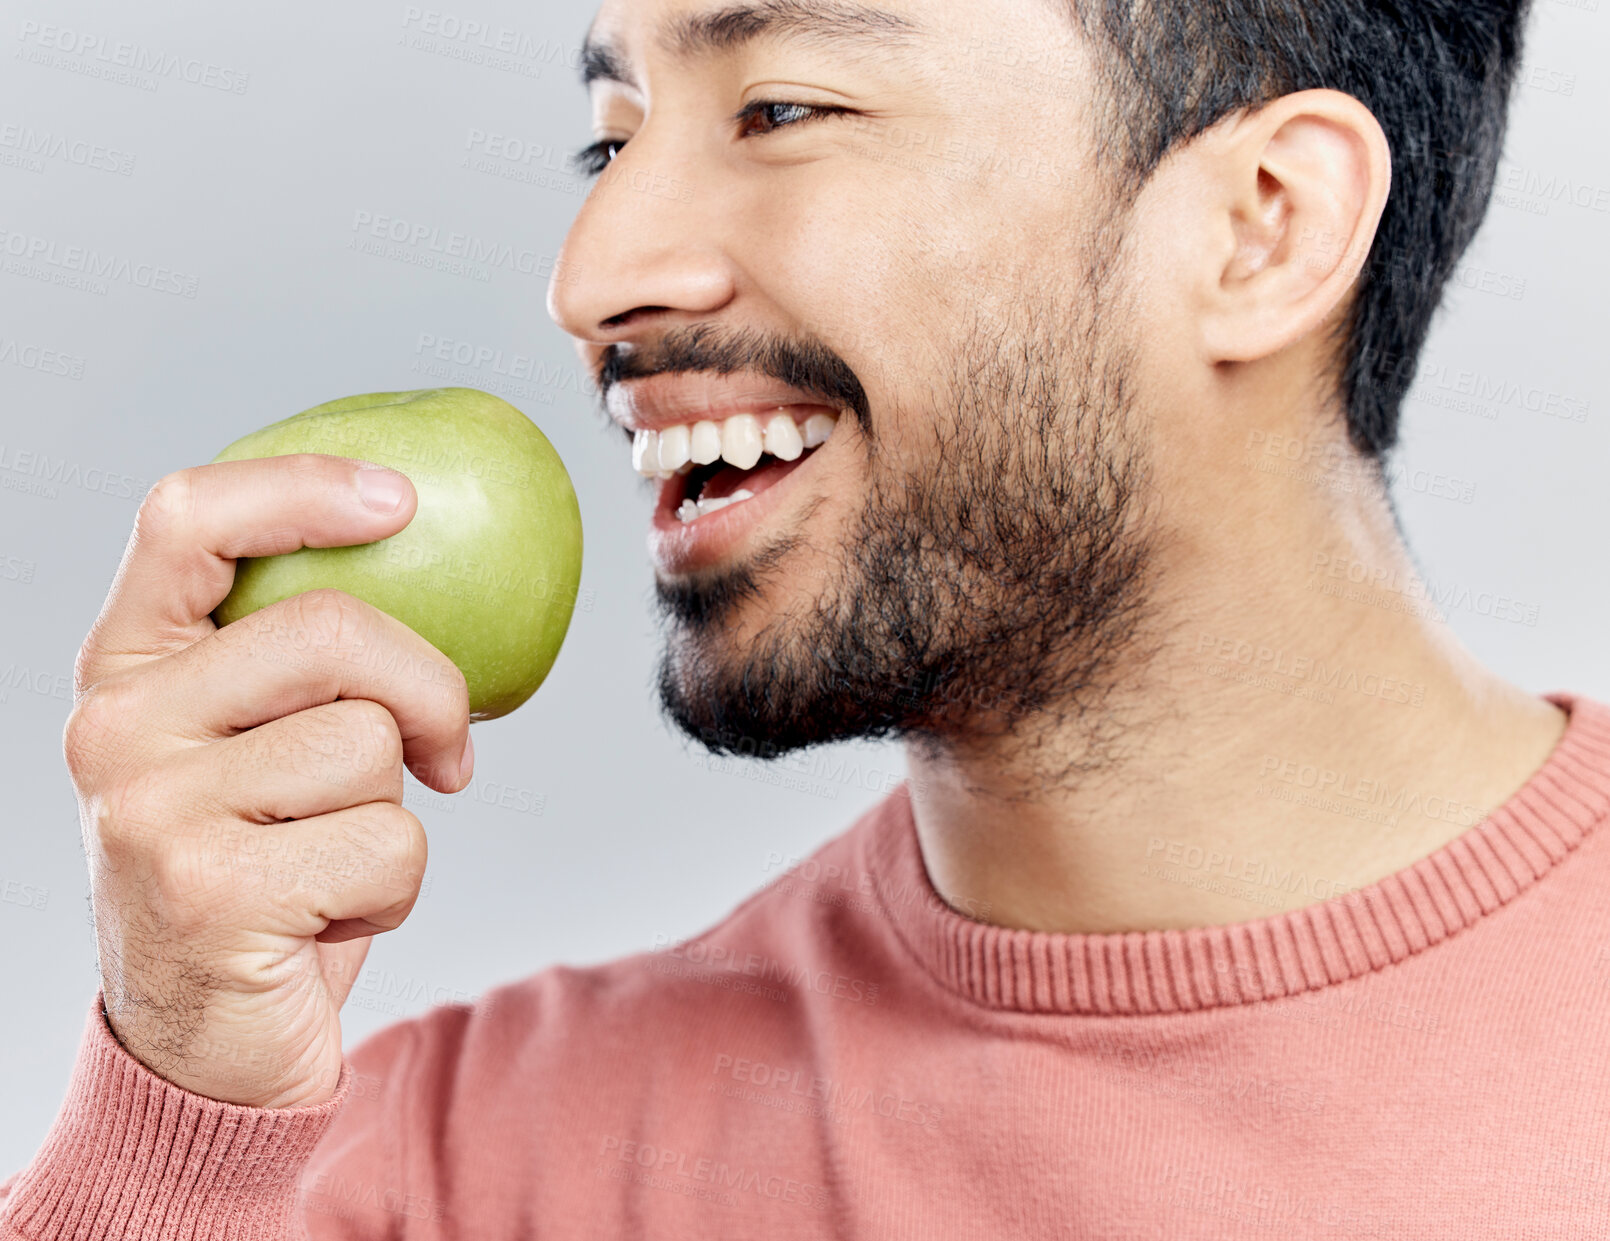 Buy stock photo Enjoying, happy and an Asian man eating an apple isolated on a white background in a studio. Smile, food and a Chinese guy taking a bite from a fruit for nutrition, diet or hungry on a backdrop